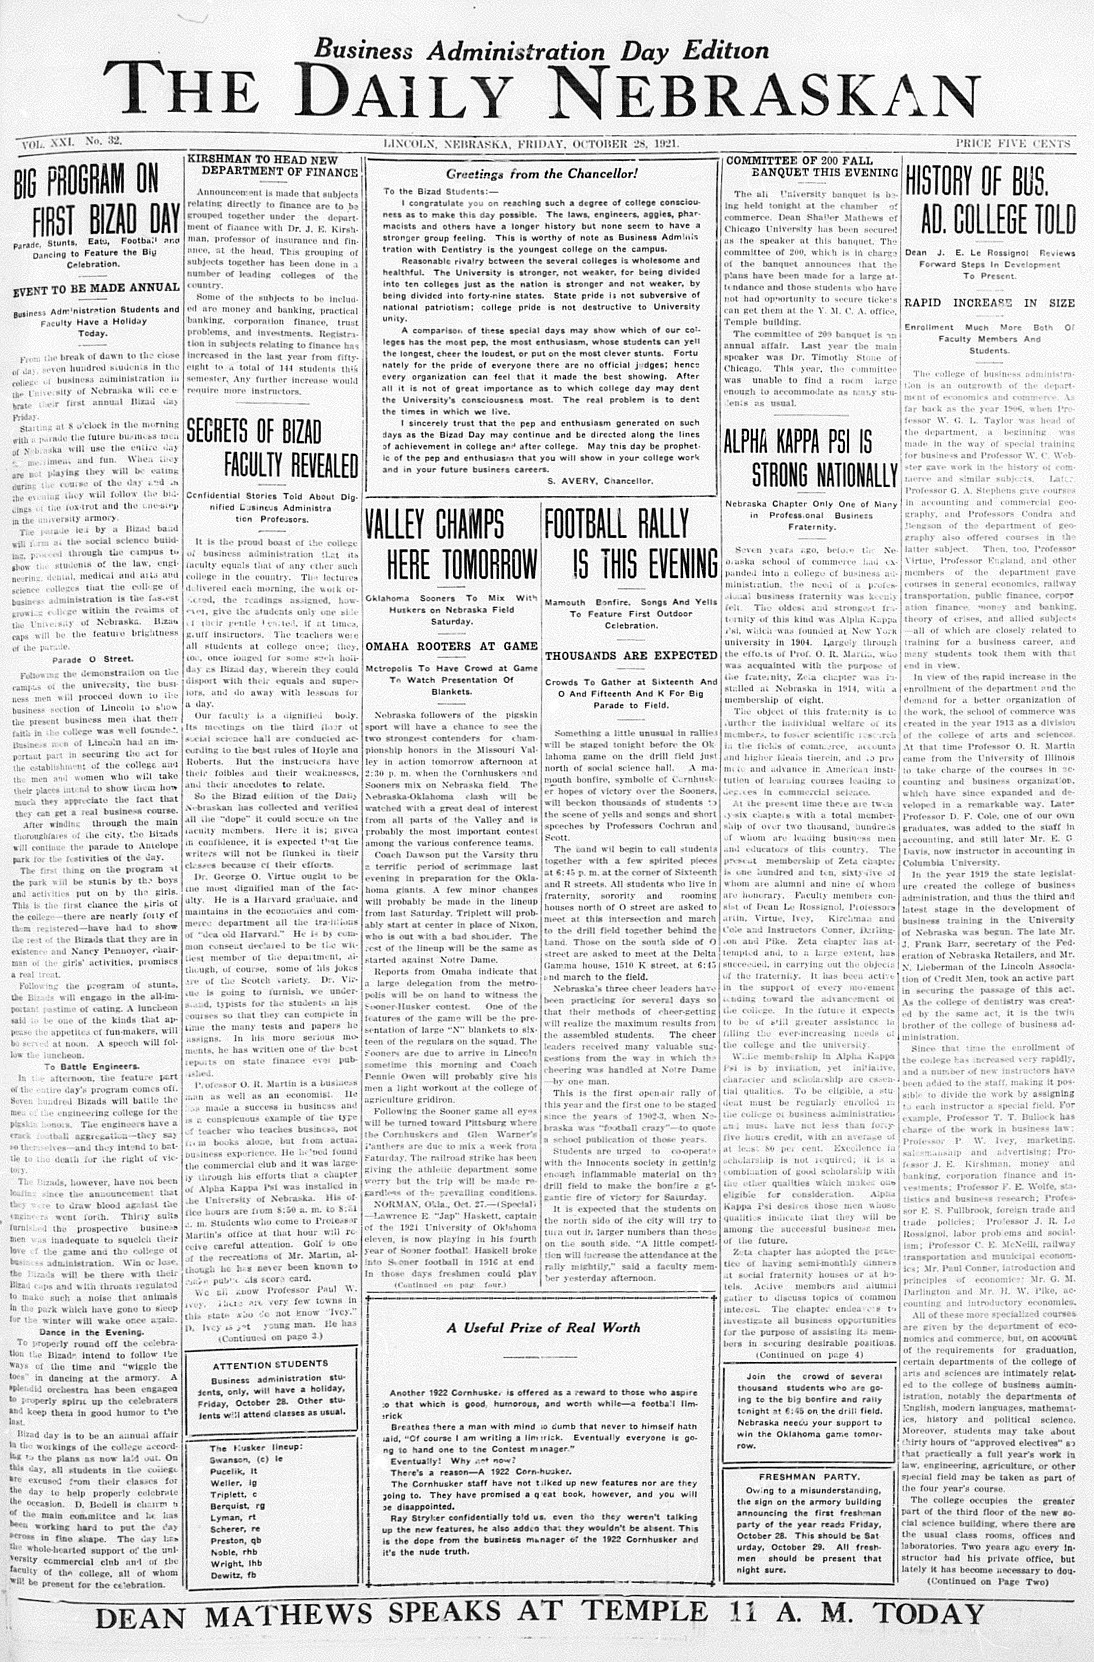 The front page of the October 28, 1921, issue of the Daily Nebraskan featured stories about the College of Business for the inaugural BizAd Day held that day. The tradition of B-Week stems from this celebratory day coordinated by students to build community within the college.